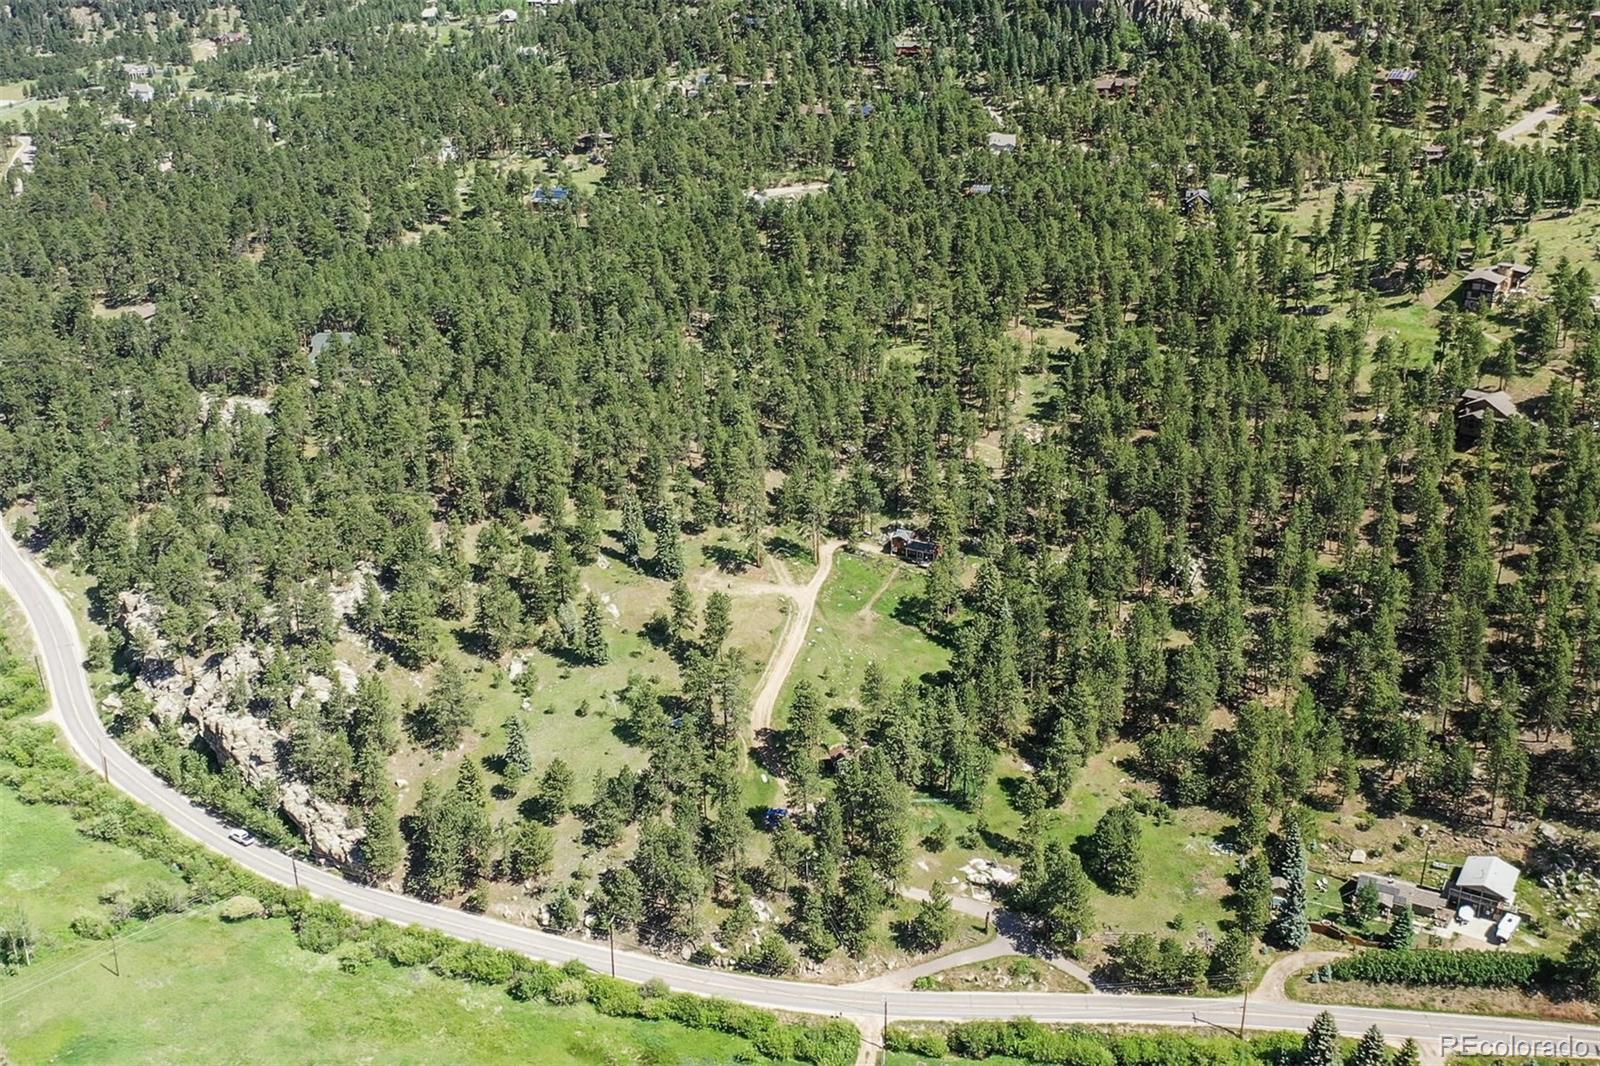 Two entry point's from Hwy 73 where they merge to one drive way up to the top. Overall aerial of land shows driveway midway up is 2nd residence, drive continues up into the trees.  Property backs up to Evergreen Highlands in rear